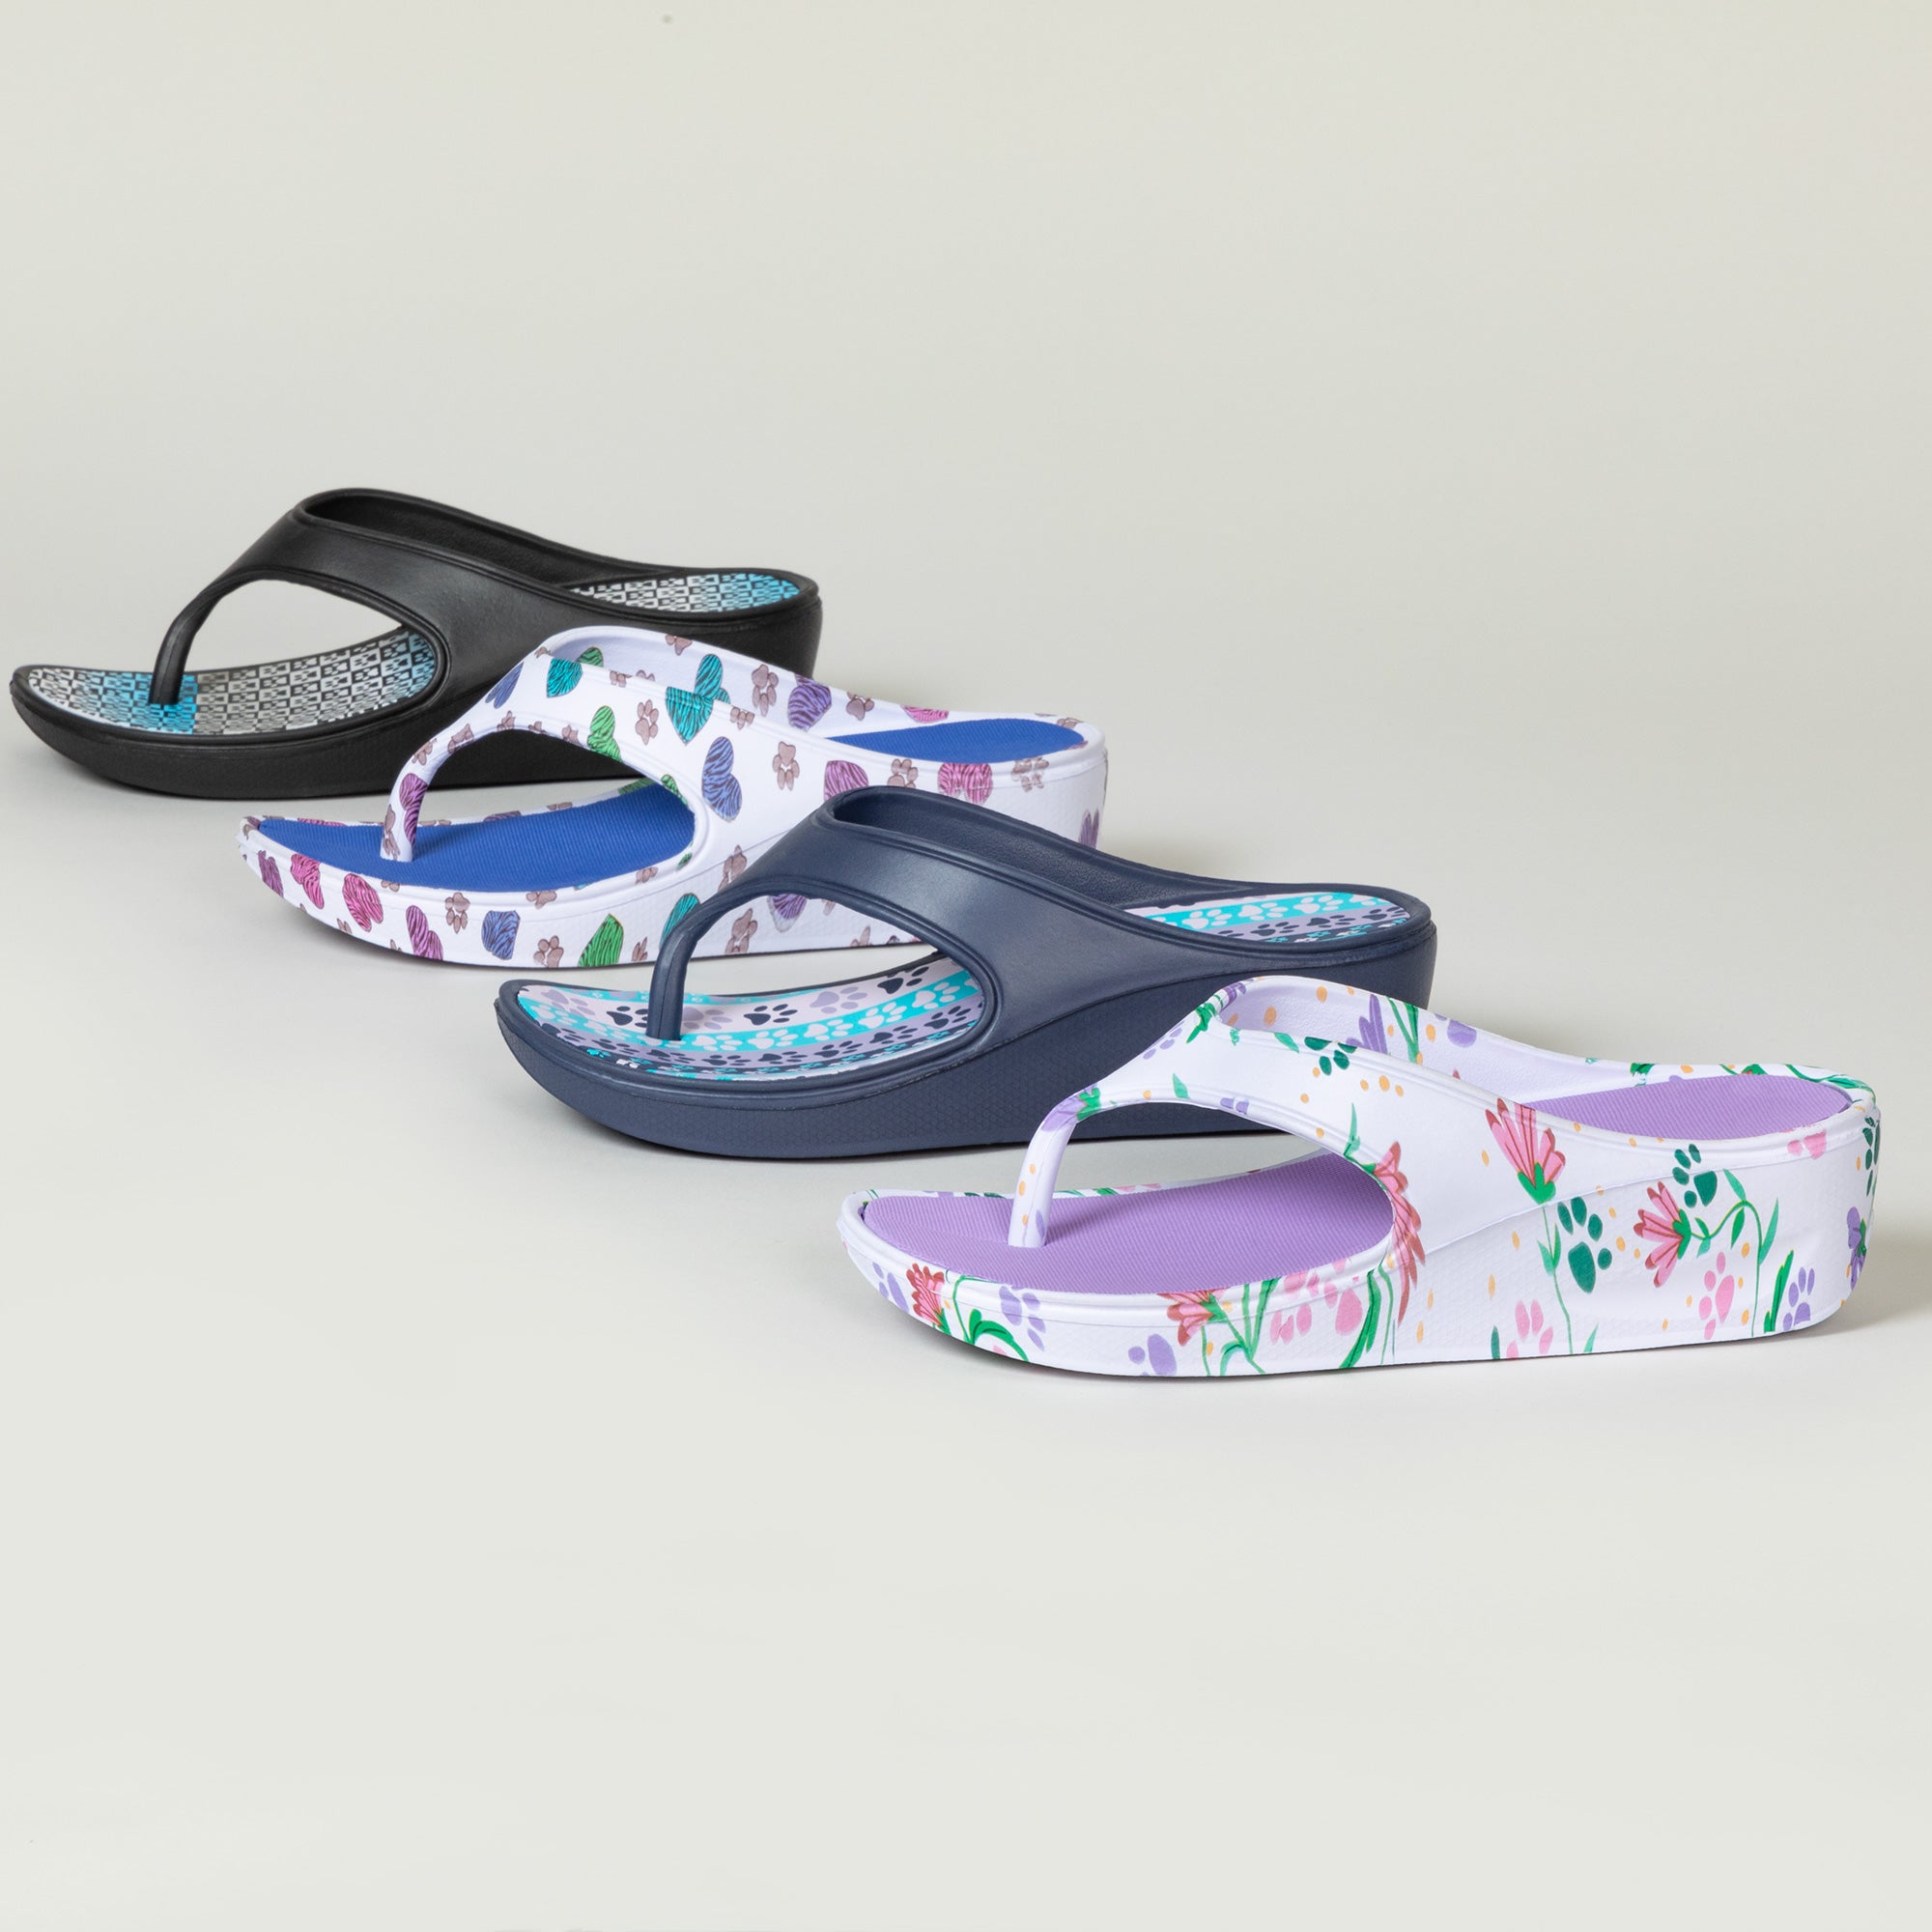 Paw Print Wedge Flip Flops - Paws & Hearts - 10